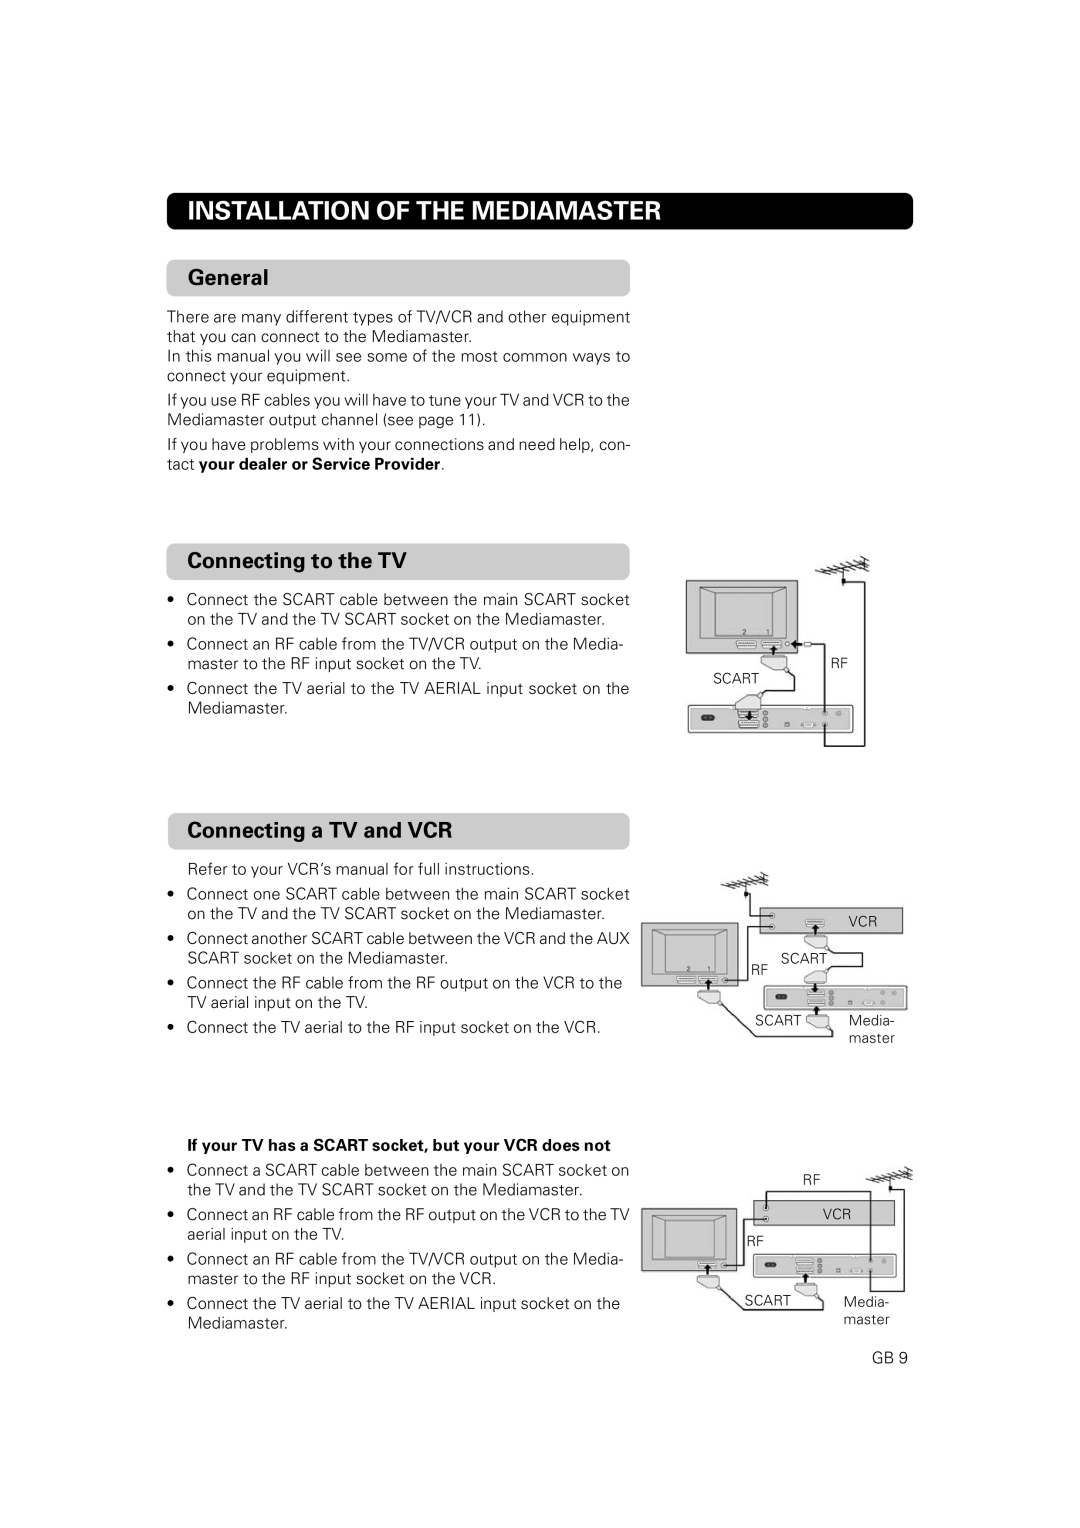 Nokia 9802 S owner manual General, Connecting to the TV, Connecting a TV and VCR, Installation Of The Mediamaster 